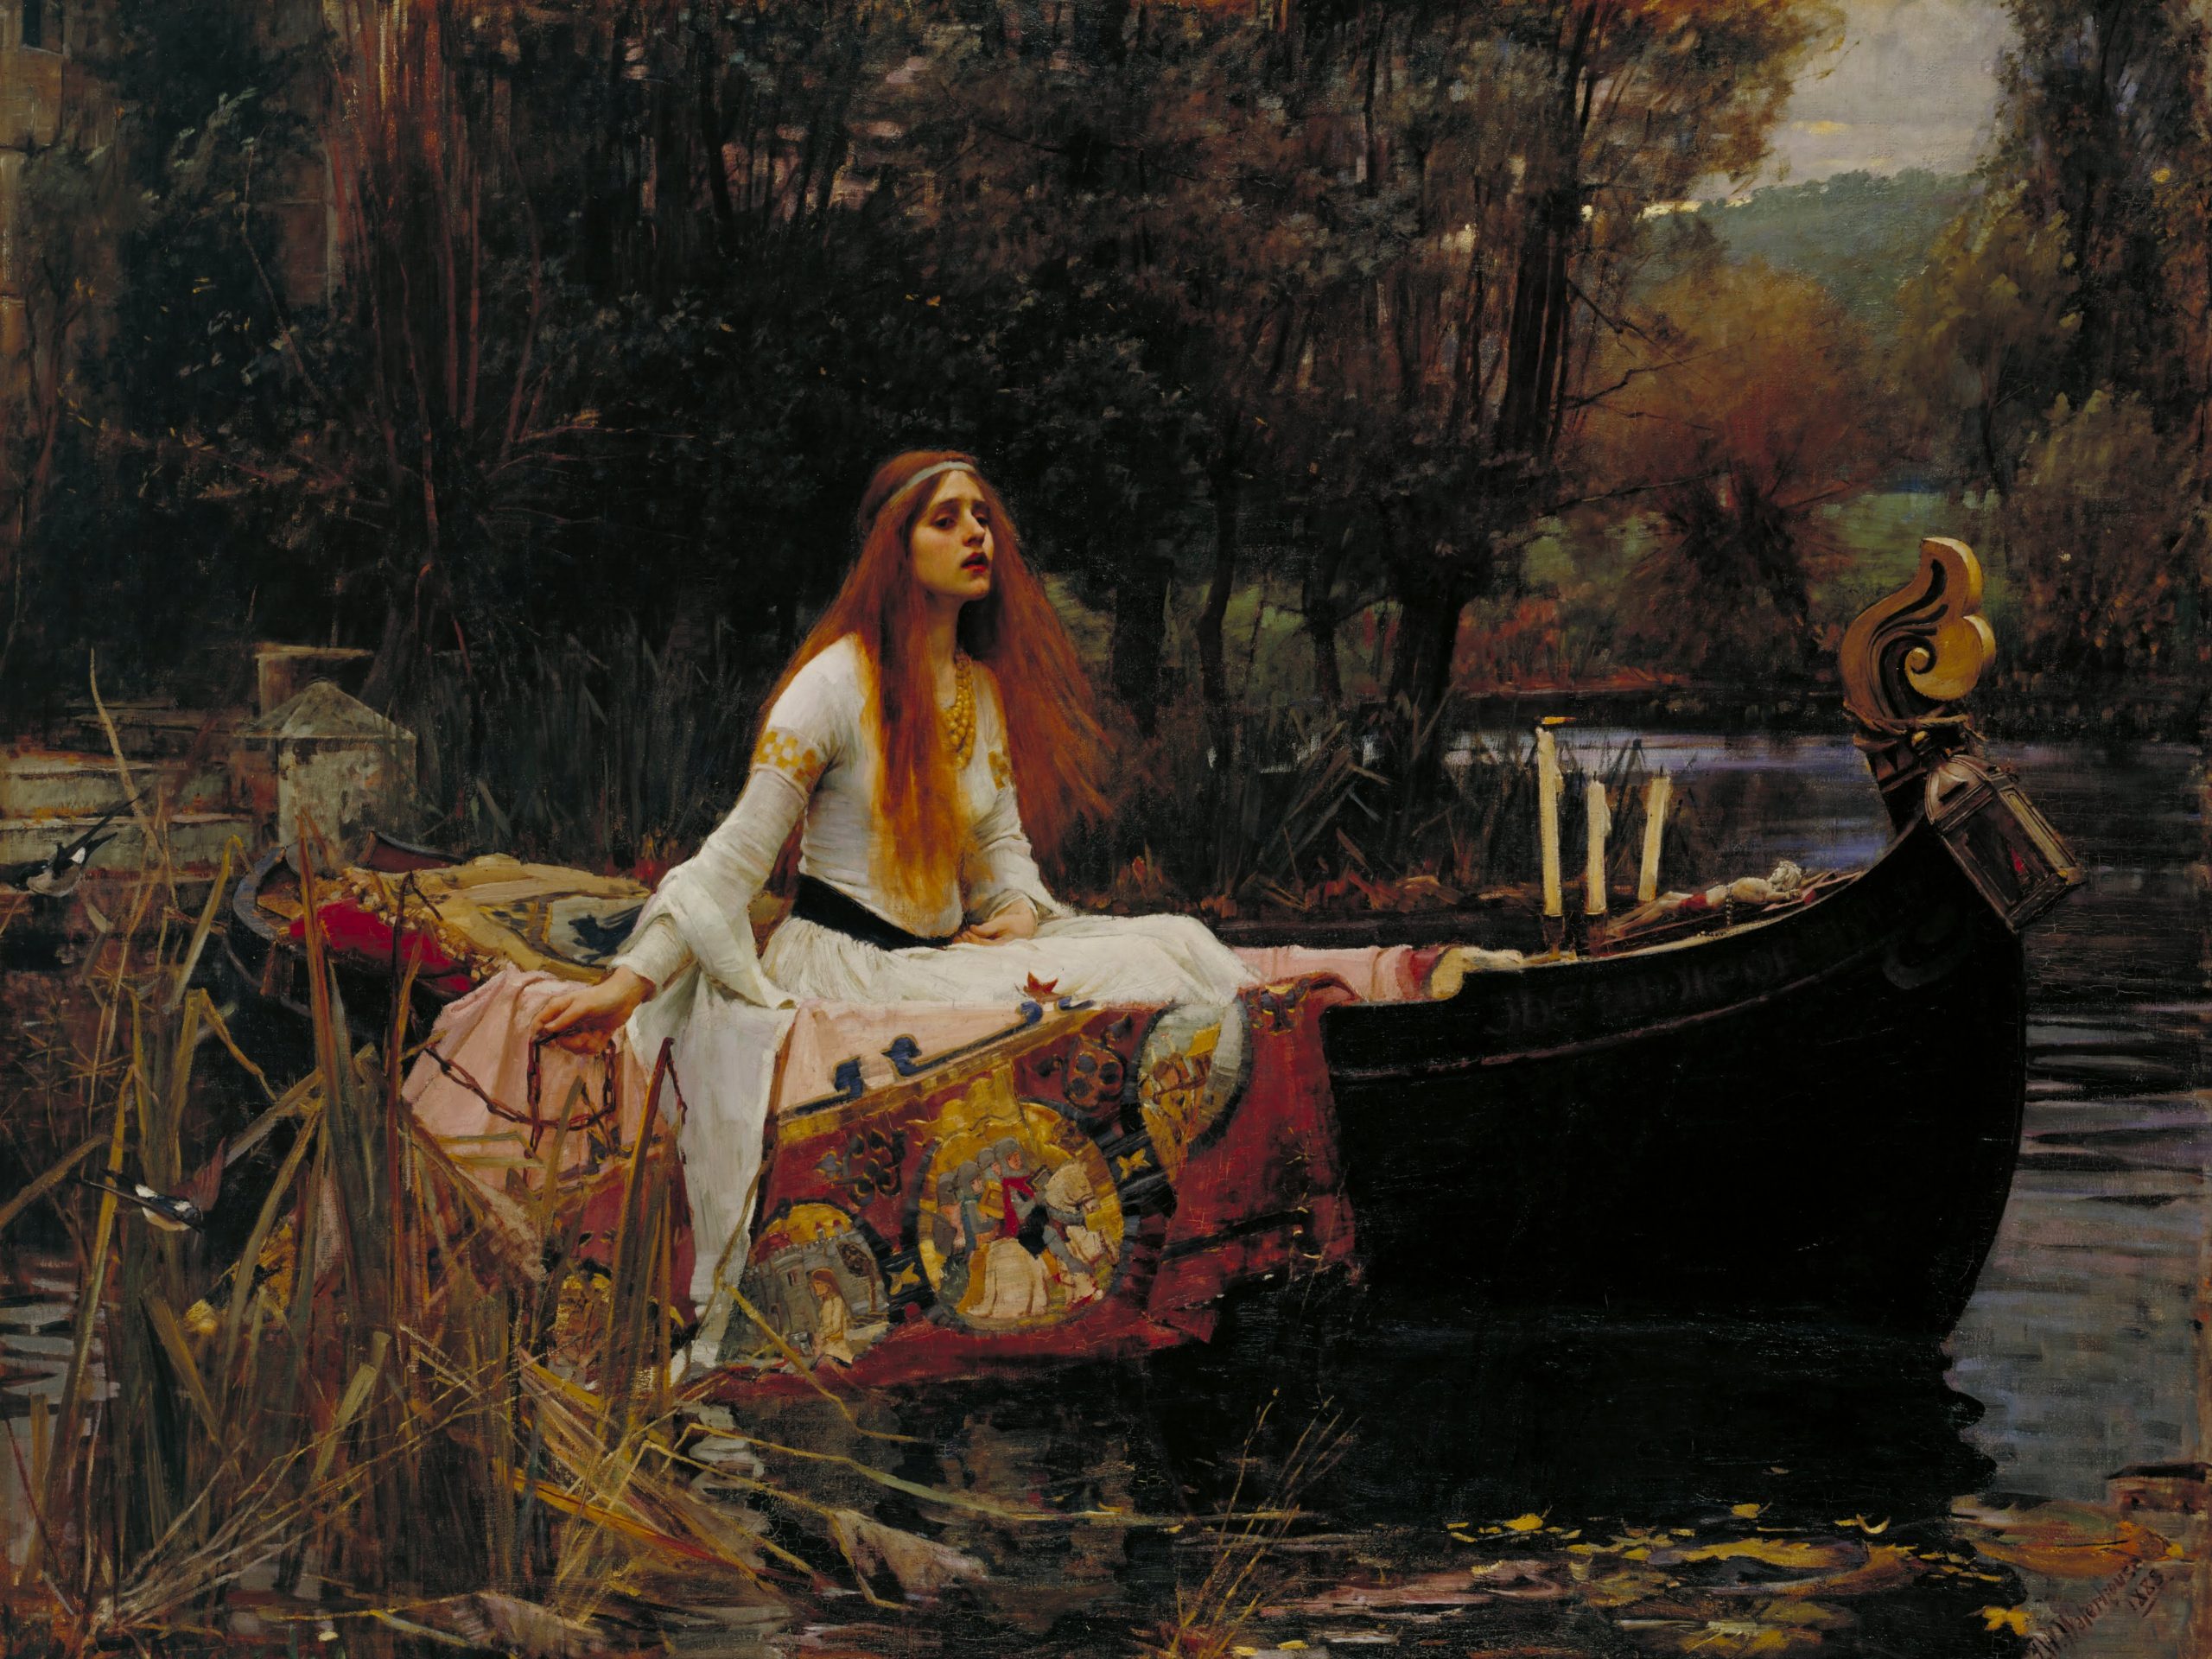 Rivers in Painting: John William Waterhouse, The Lady of Shallot, 1888, Tate Britain, London, UK.